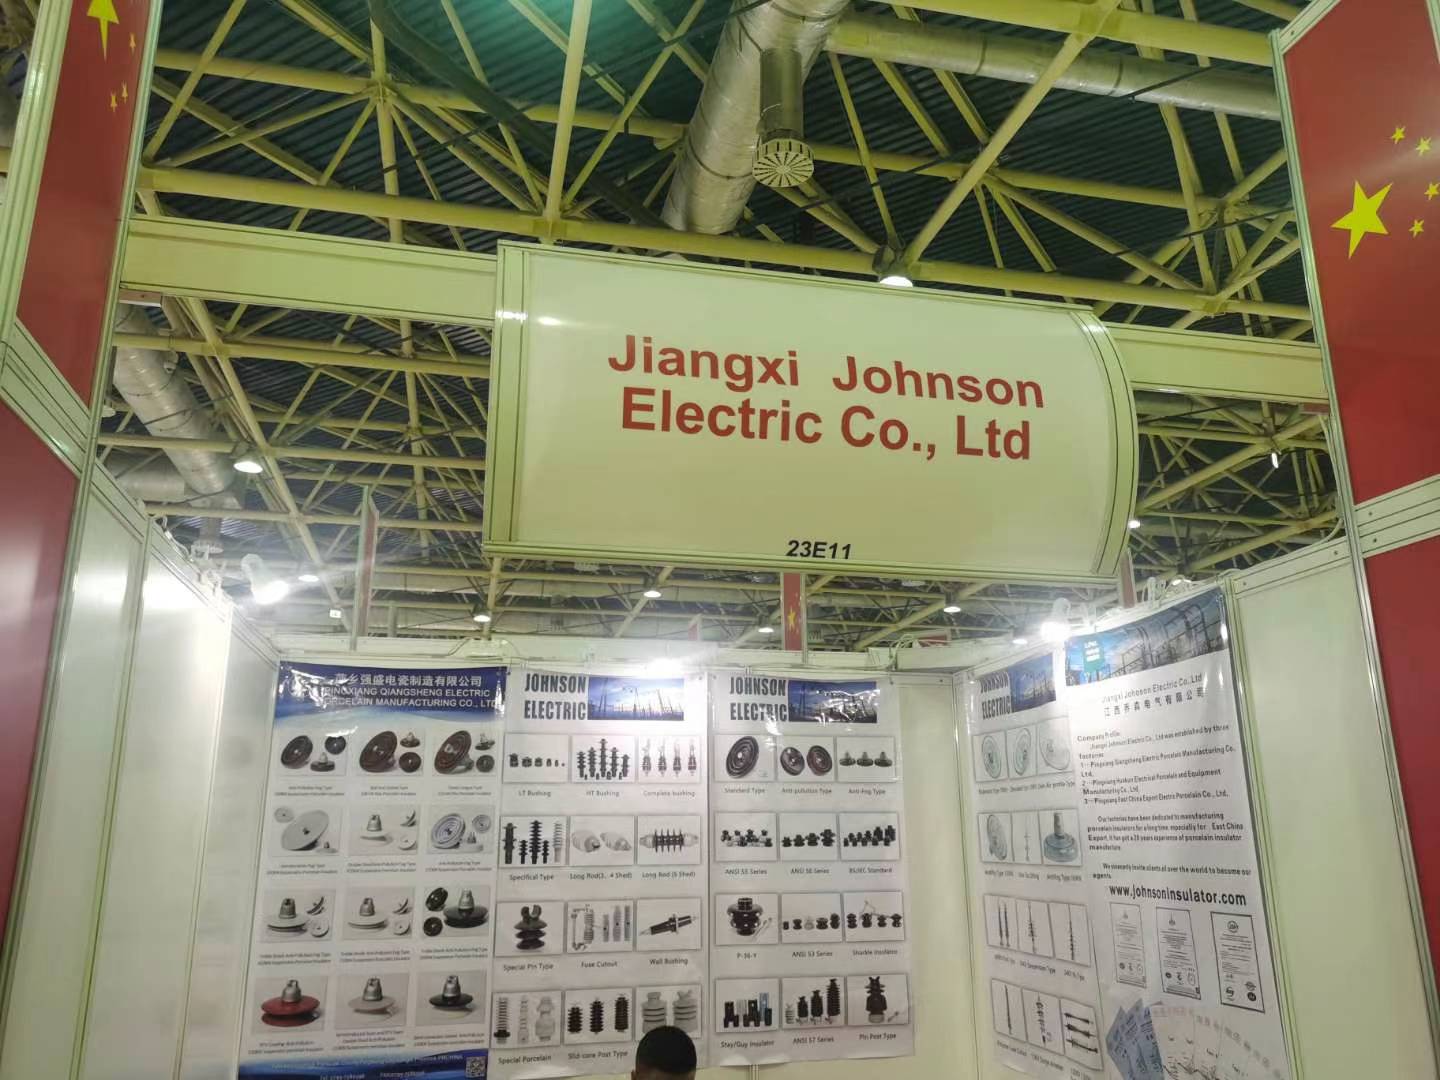 Johnson has arrived at the Russian Electricity Exhibition and welcomes everyone to visit